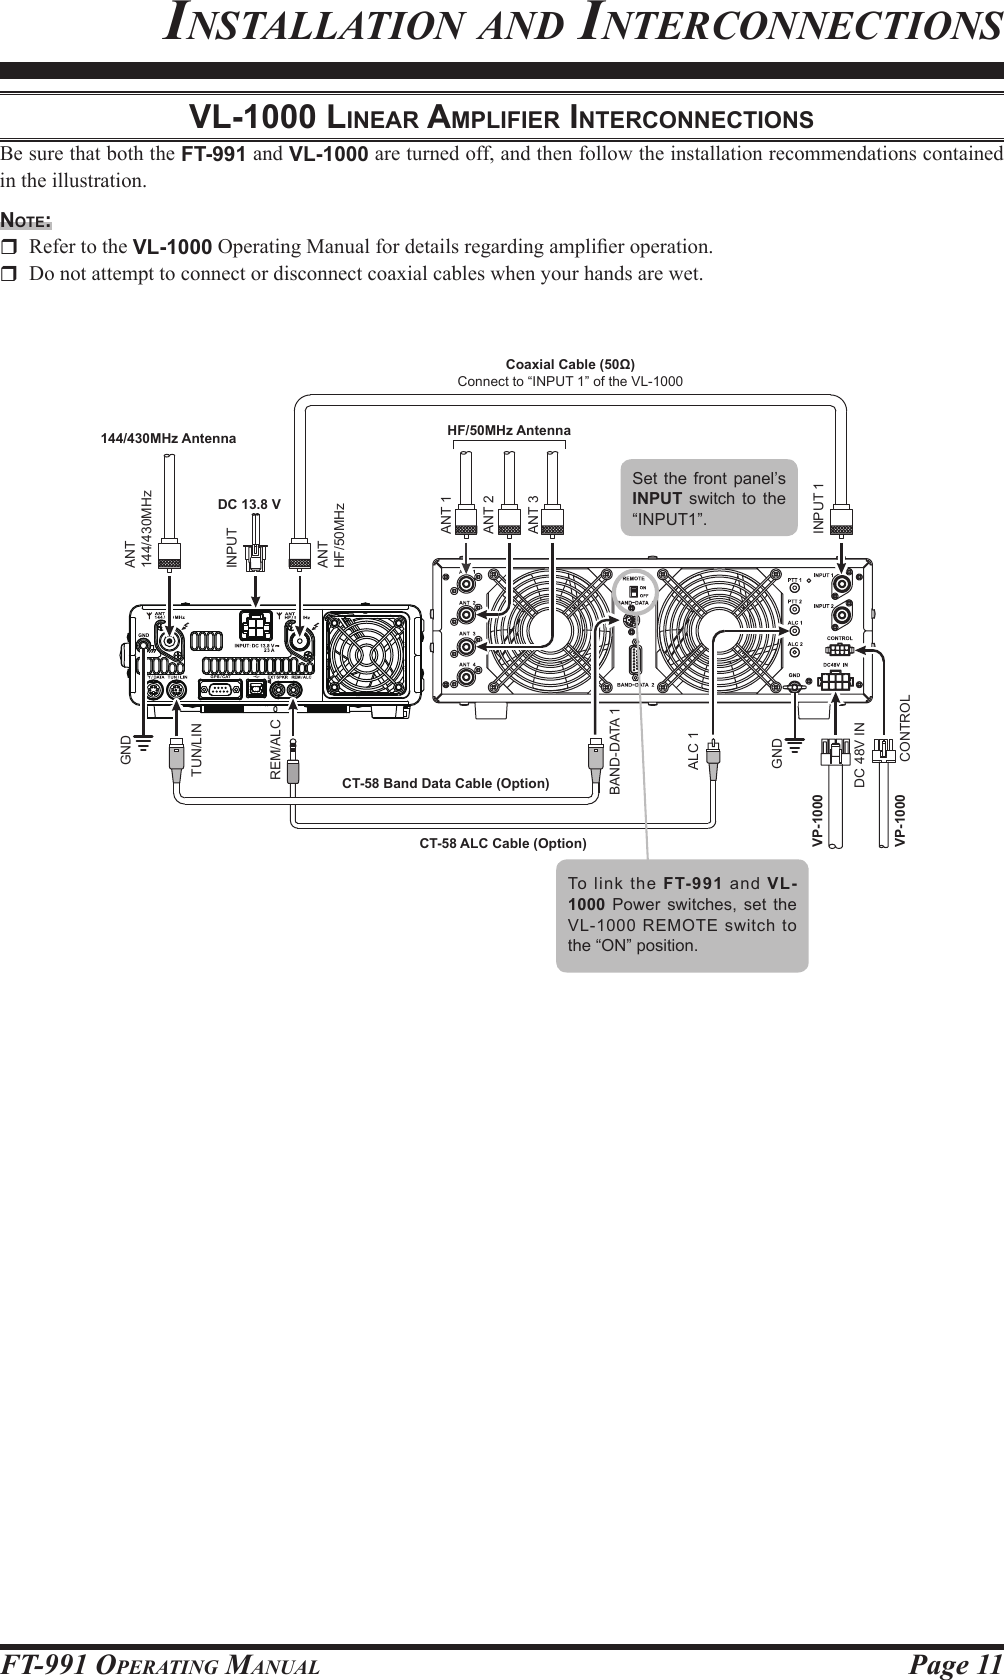 Page 11FT-991 OperaTing ManualDC 13.8 VCT-58 ALC Cable (Option)CT-58 Band Data Cable (Option)144/430MHz Antenna HF/50MHz AntennaCoaxial Cable (50Ω)Connect to “INPUT 1” of the VL-1000INPUTBAND-DATA 1ALC 1TUN/LINREM/ALCGNDGNDVP-1000VP-1000 CONTROLDC 48V INANT 1ANT 2ANT 3INPUT 1ANT144/430MHzANTHF/50MHzinsTallaTion and inTerConneCTionsvl-1000 lineAr AMpliFier interconnectionSBe sure that both the FT-991 and VL-1000 are turned off, and then follow the installation recommendations contained in the illustration.note:  Refer to the VL-1000 Operating Manual for details regarding amplier operation.  Do not attempt to connect or disconnect coaxial cables when your hands are wet.To link the FT-991 and VL-1000 Power switches, set the VL-1000 REMOTE switch to the “ON” position.Set the front panel’s INPUT  switch to the “INPUT1”.